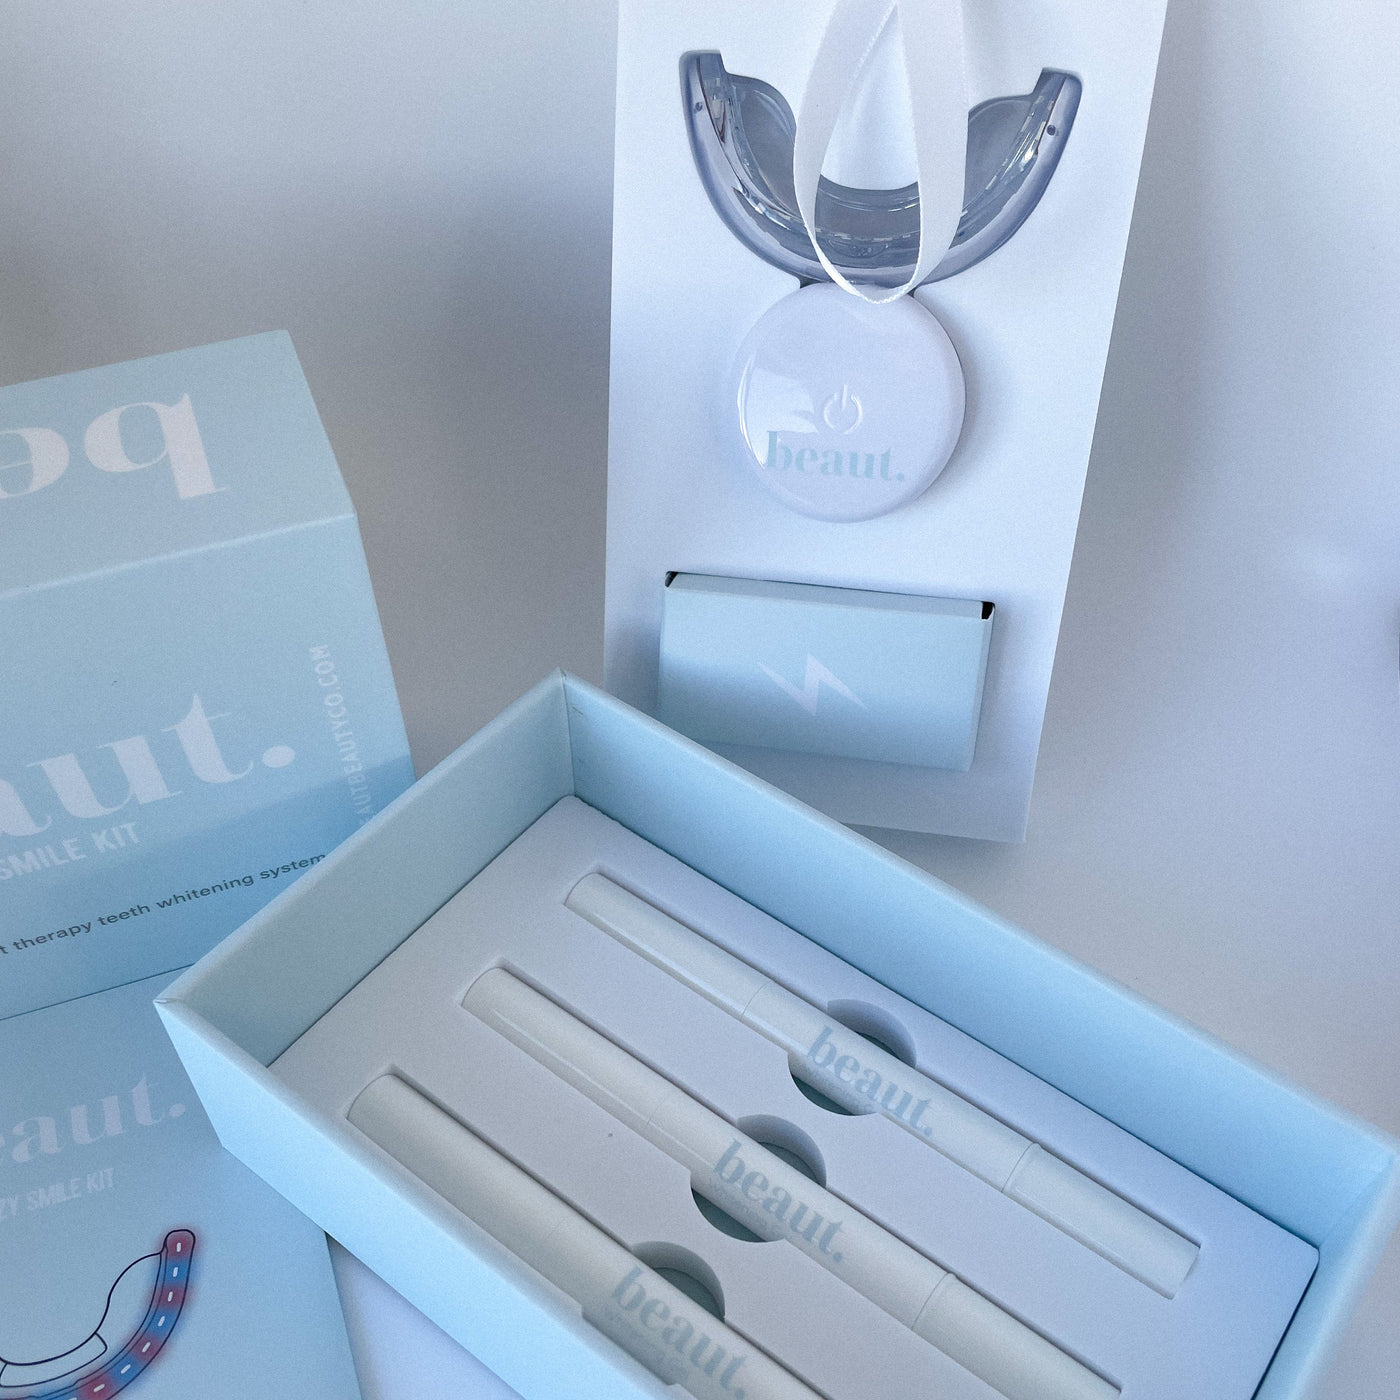 Cozy Smile Kit by beaut.